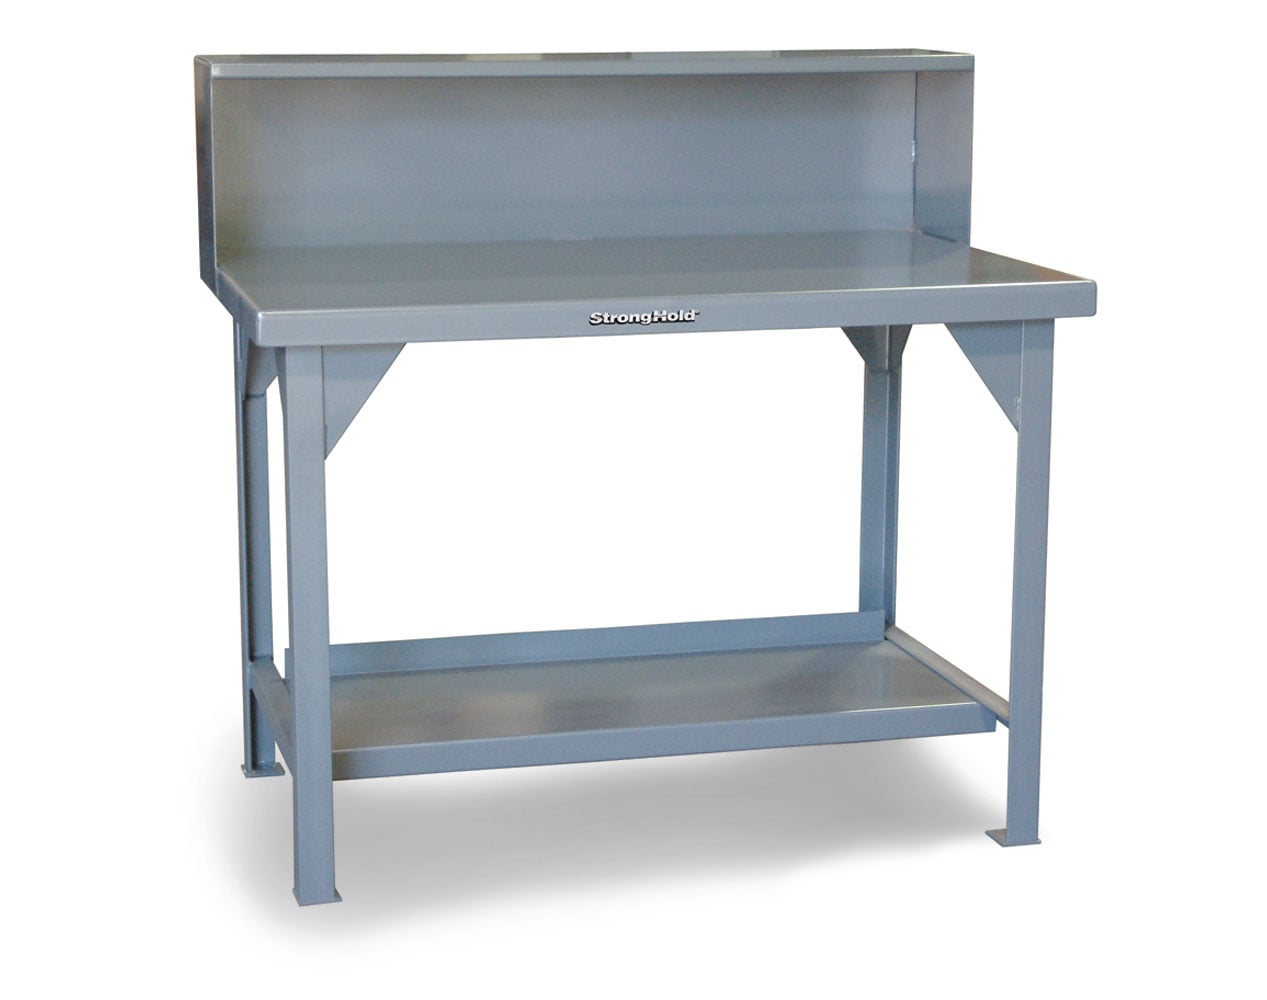 Extreme Duty 7 GA Shop Table with Riser Shelf - 84 In. W x 36 In. D x 46 In. H